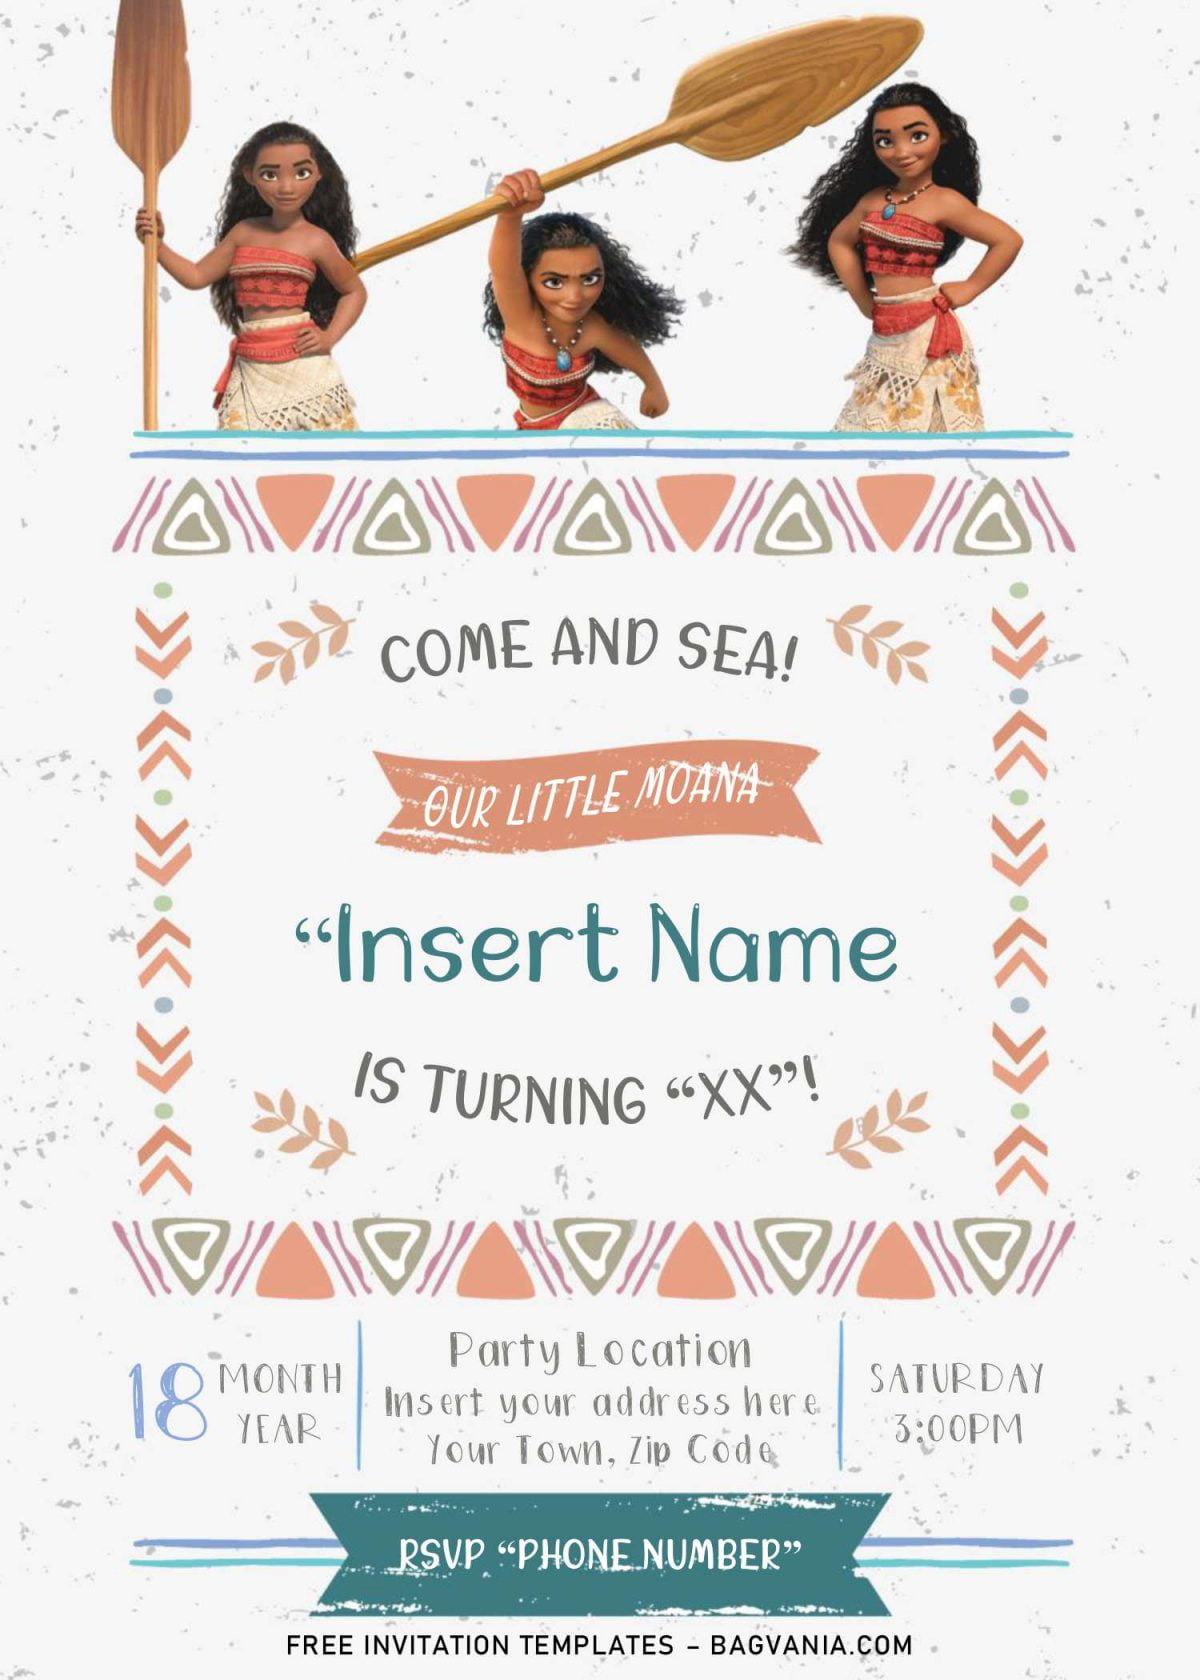 Free Moana Birthday Invitation Templates For Word and has adorable watercolor tribal inspired border design